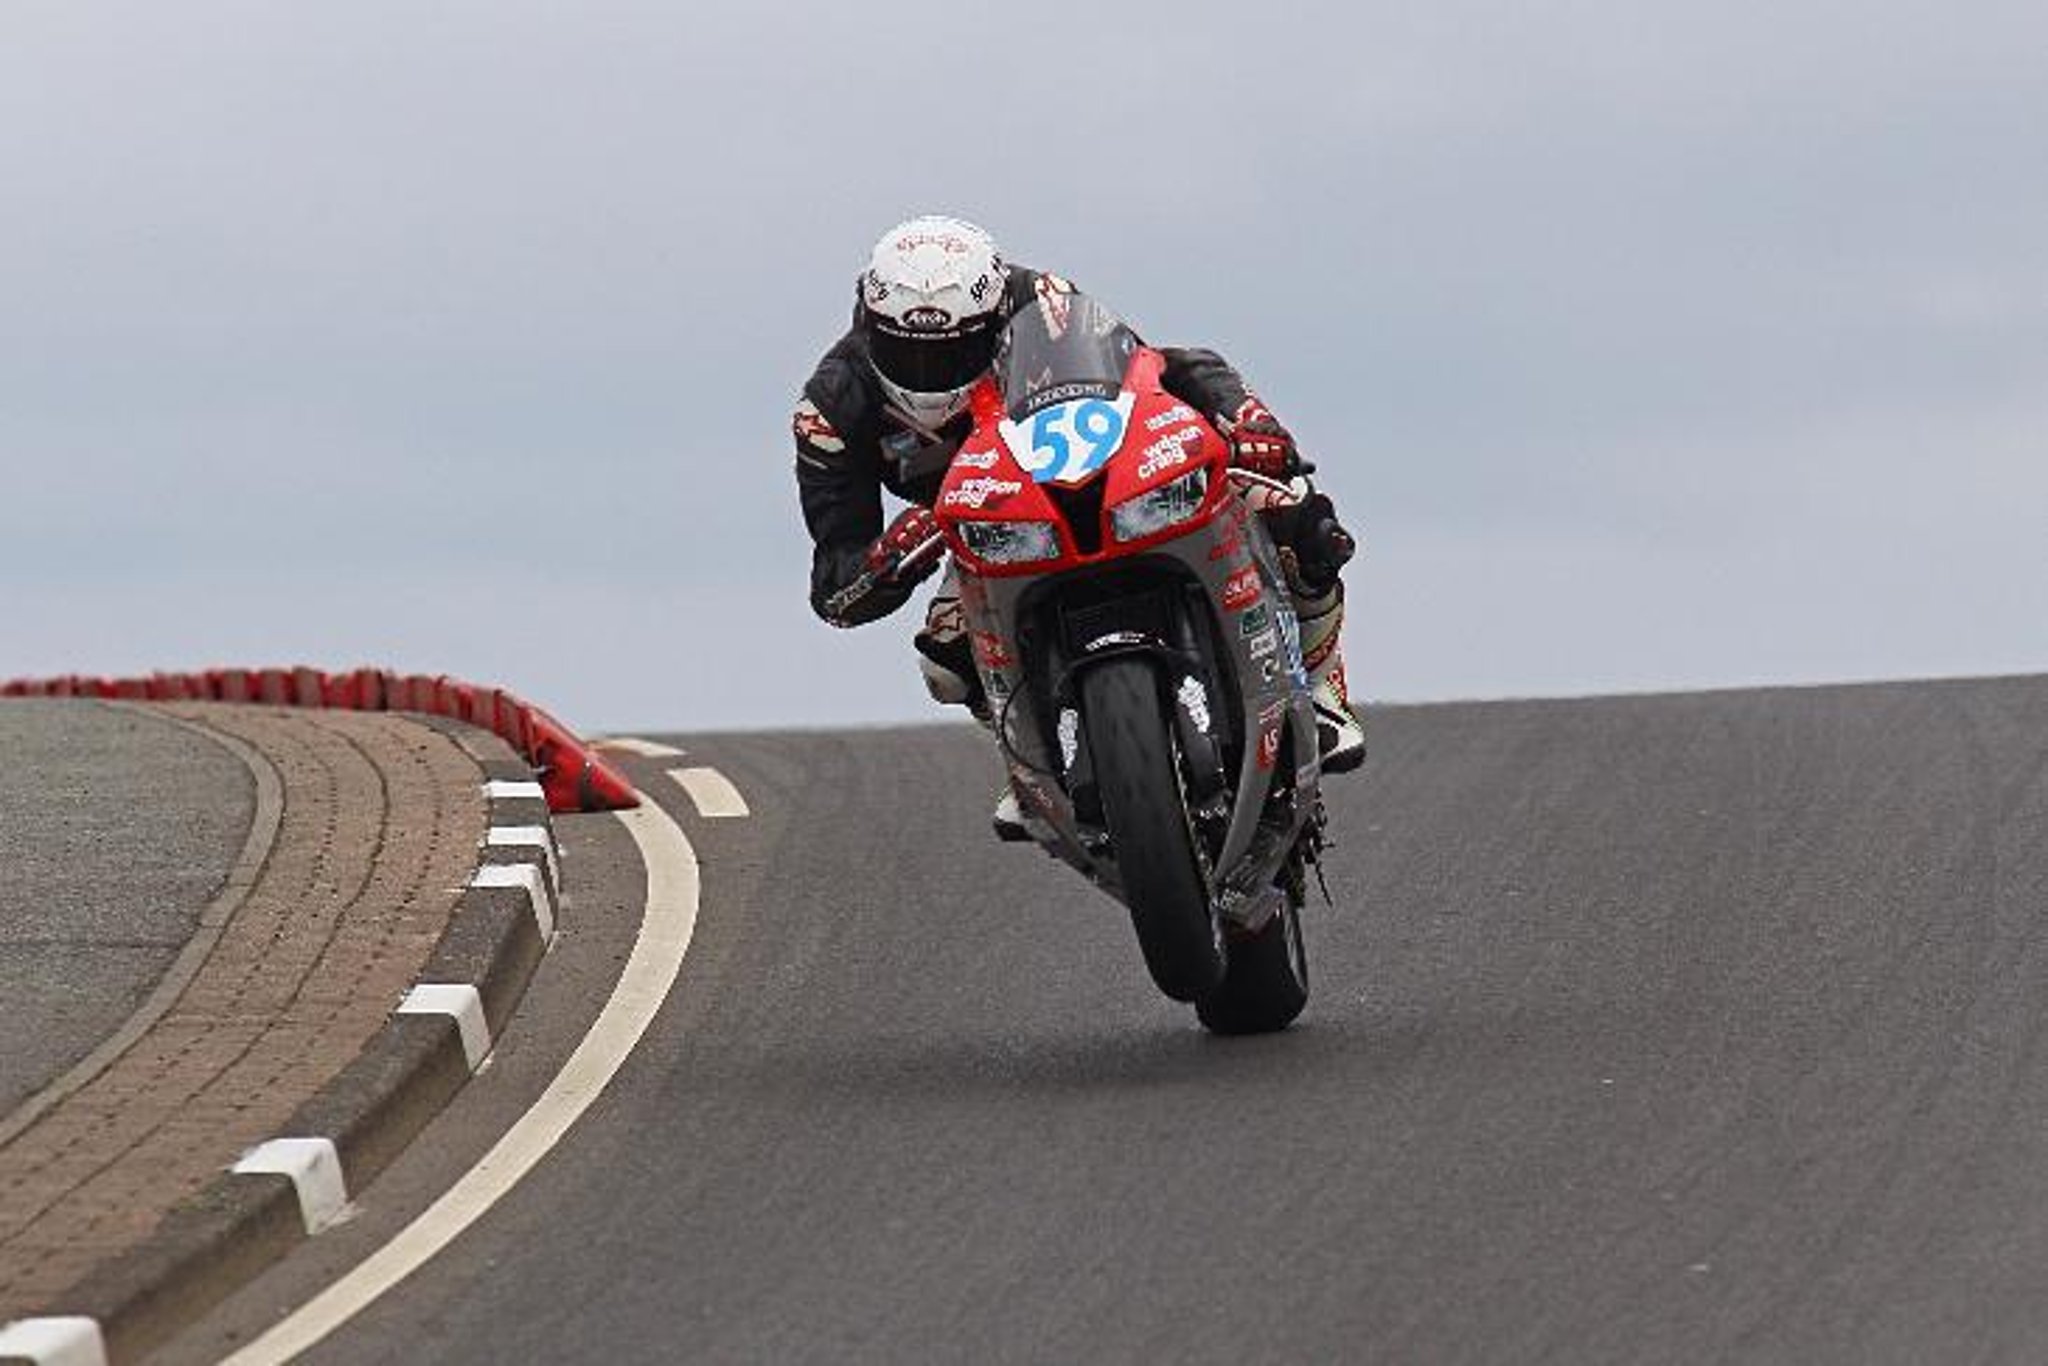 Darryl Tweed's Isle of Man TT dream in tatters after promises of financial help prove hollow